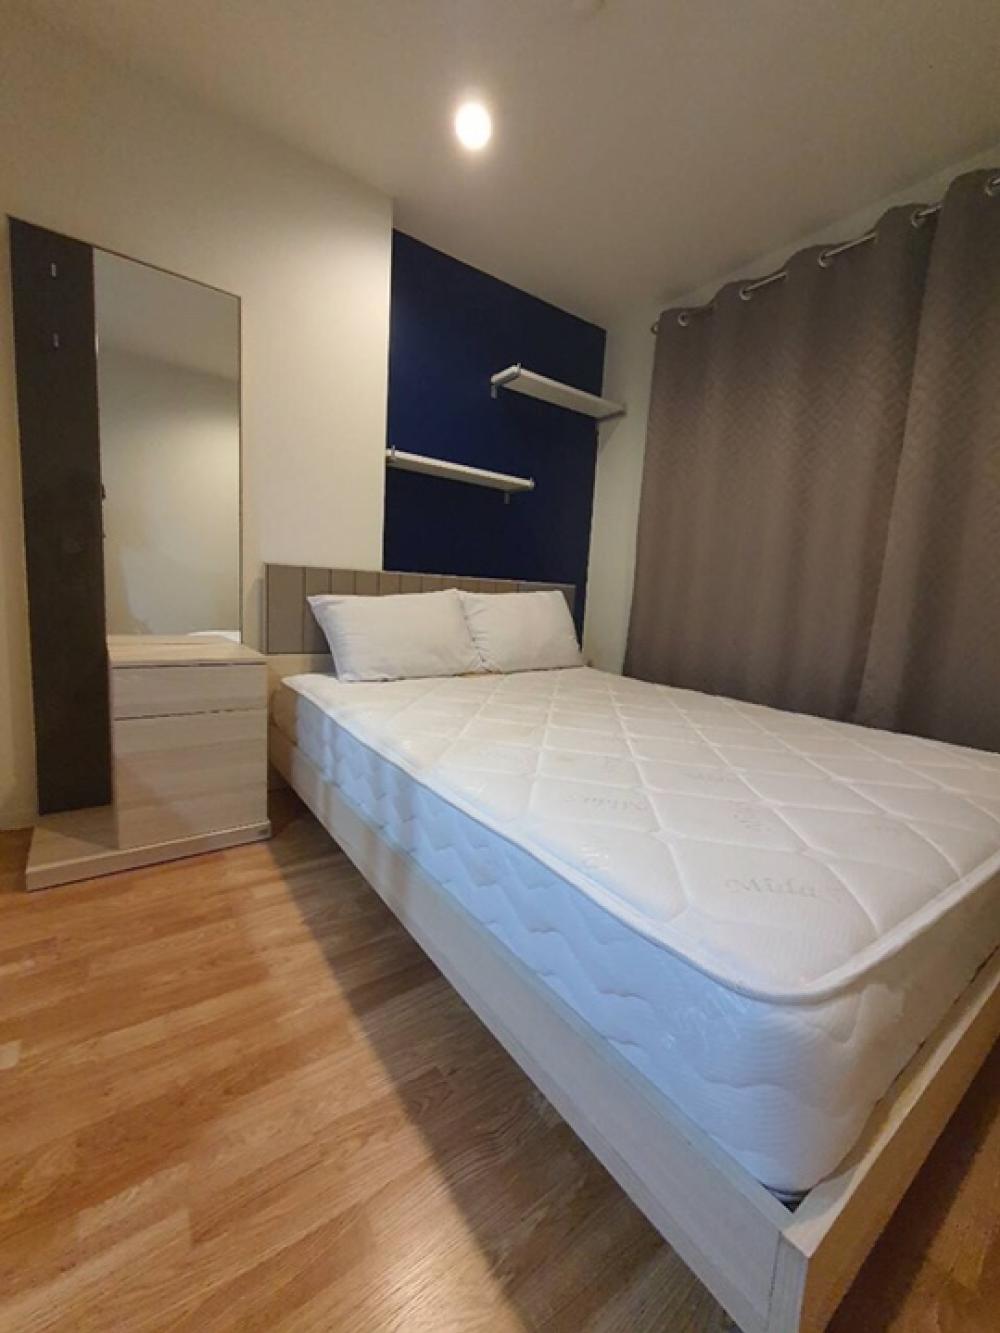 For RentCondoRama5, Ratchapruek, Bangkruai : Condo for rent Lumpini Nakhon In price 6500฿ This price is ready to make a contract or pay to reserve Building B. 18th floor, size 23.50 sq m. Fully furnished, complete electrical appliances, has a washing machine, room with balcony, available room, ready